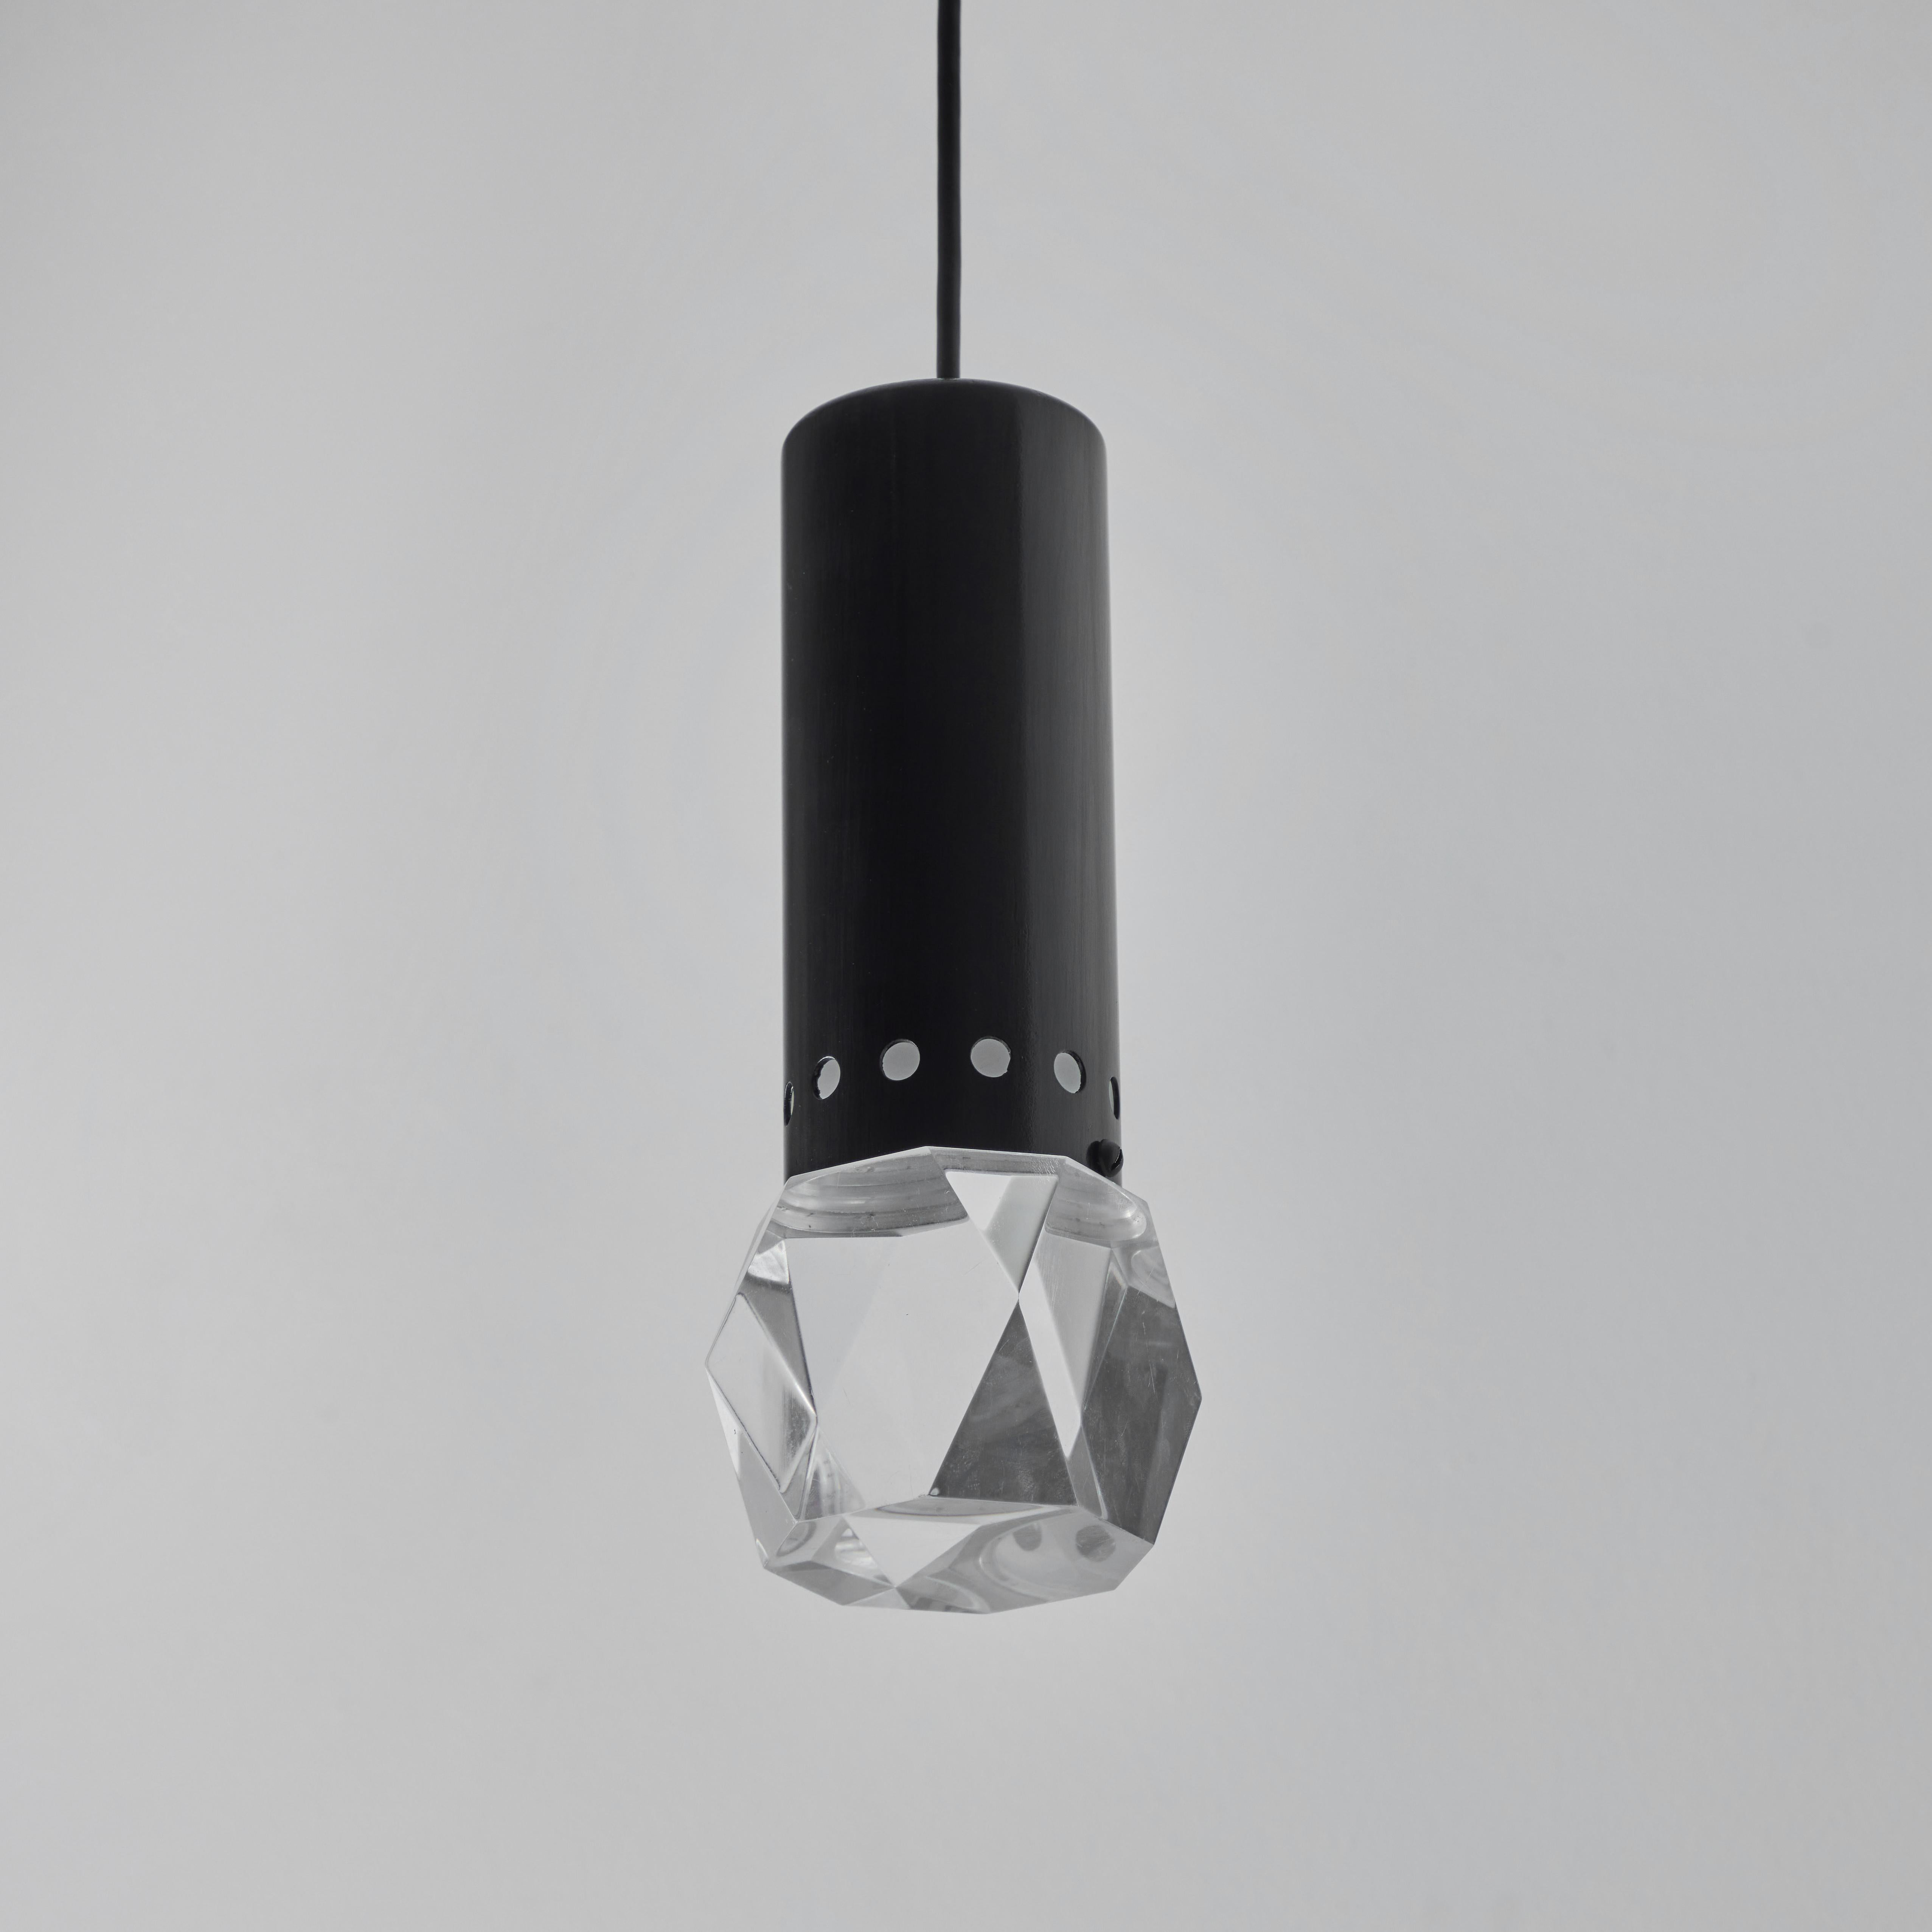 Mid-20th Century 1960s Stilnovo Faceted Diffuser Pendant Lamp For Sale